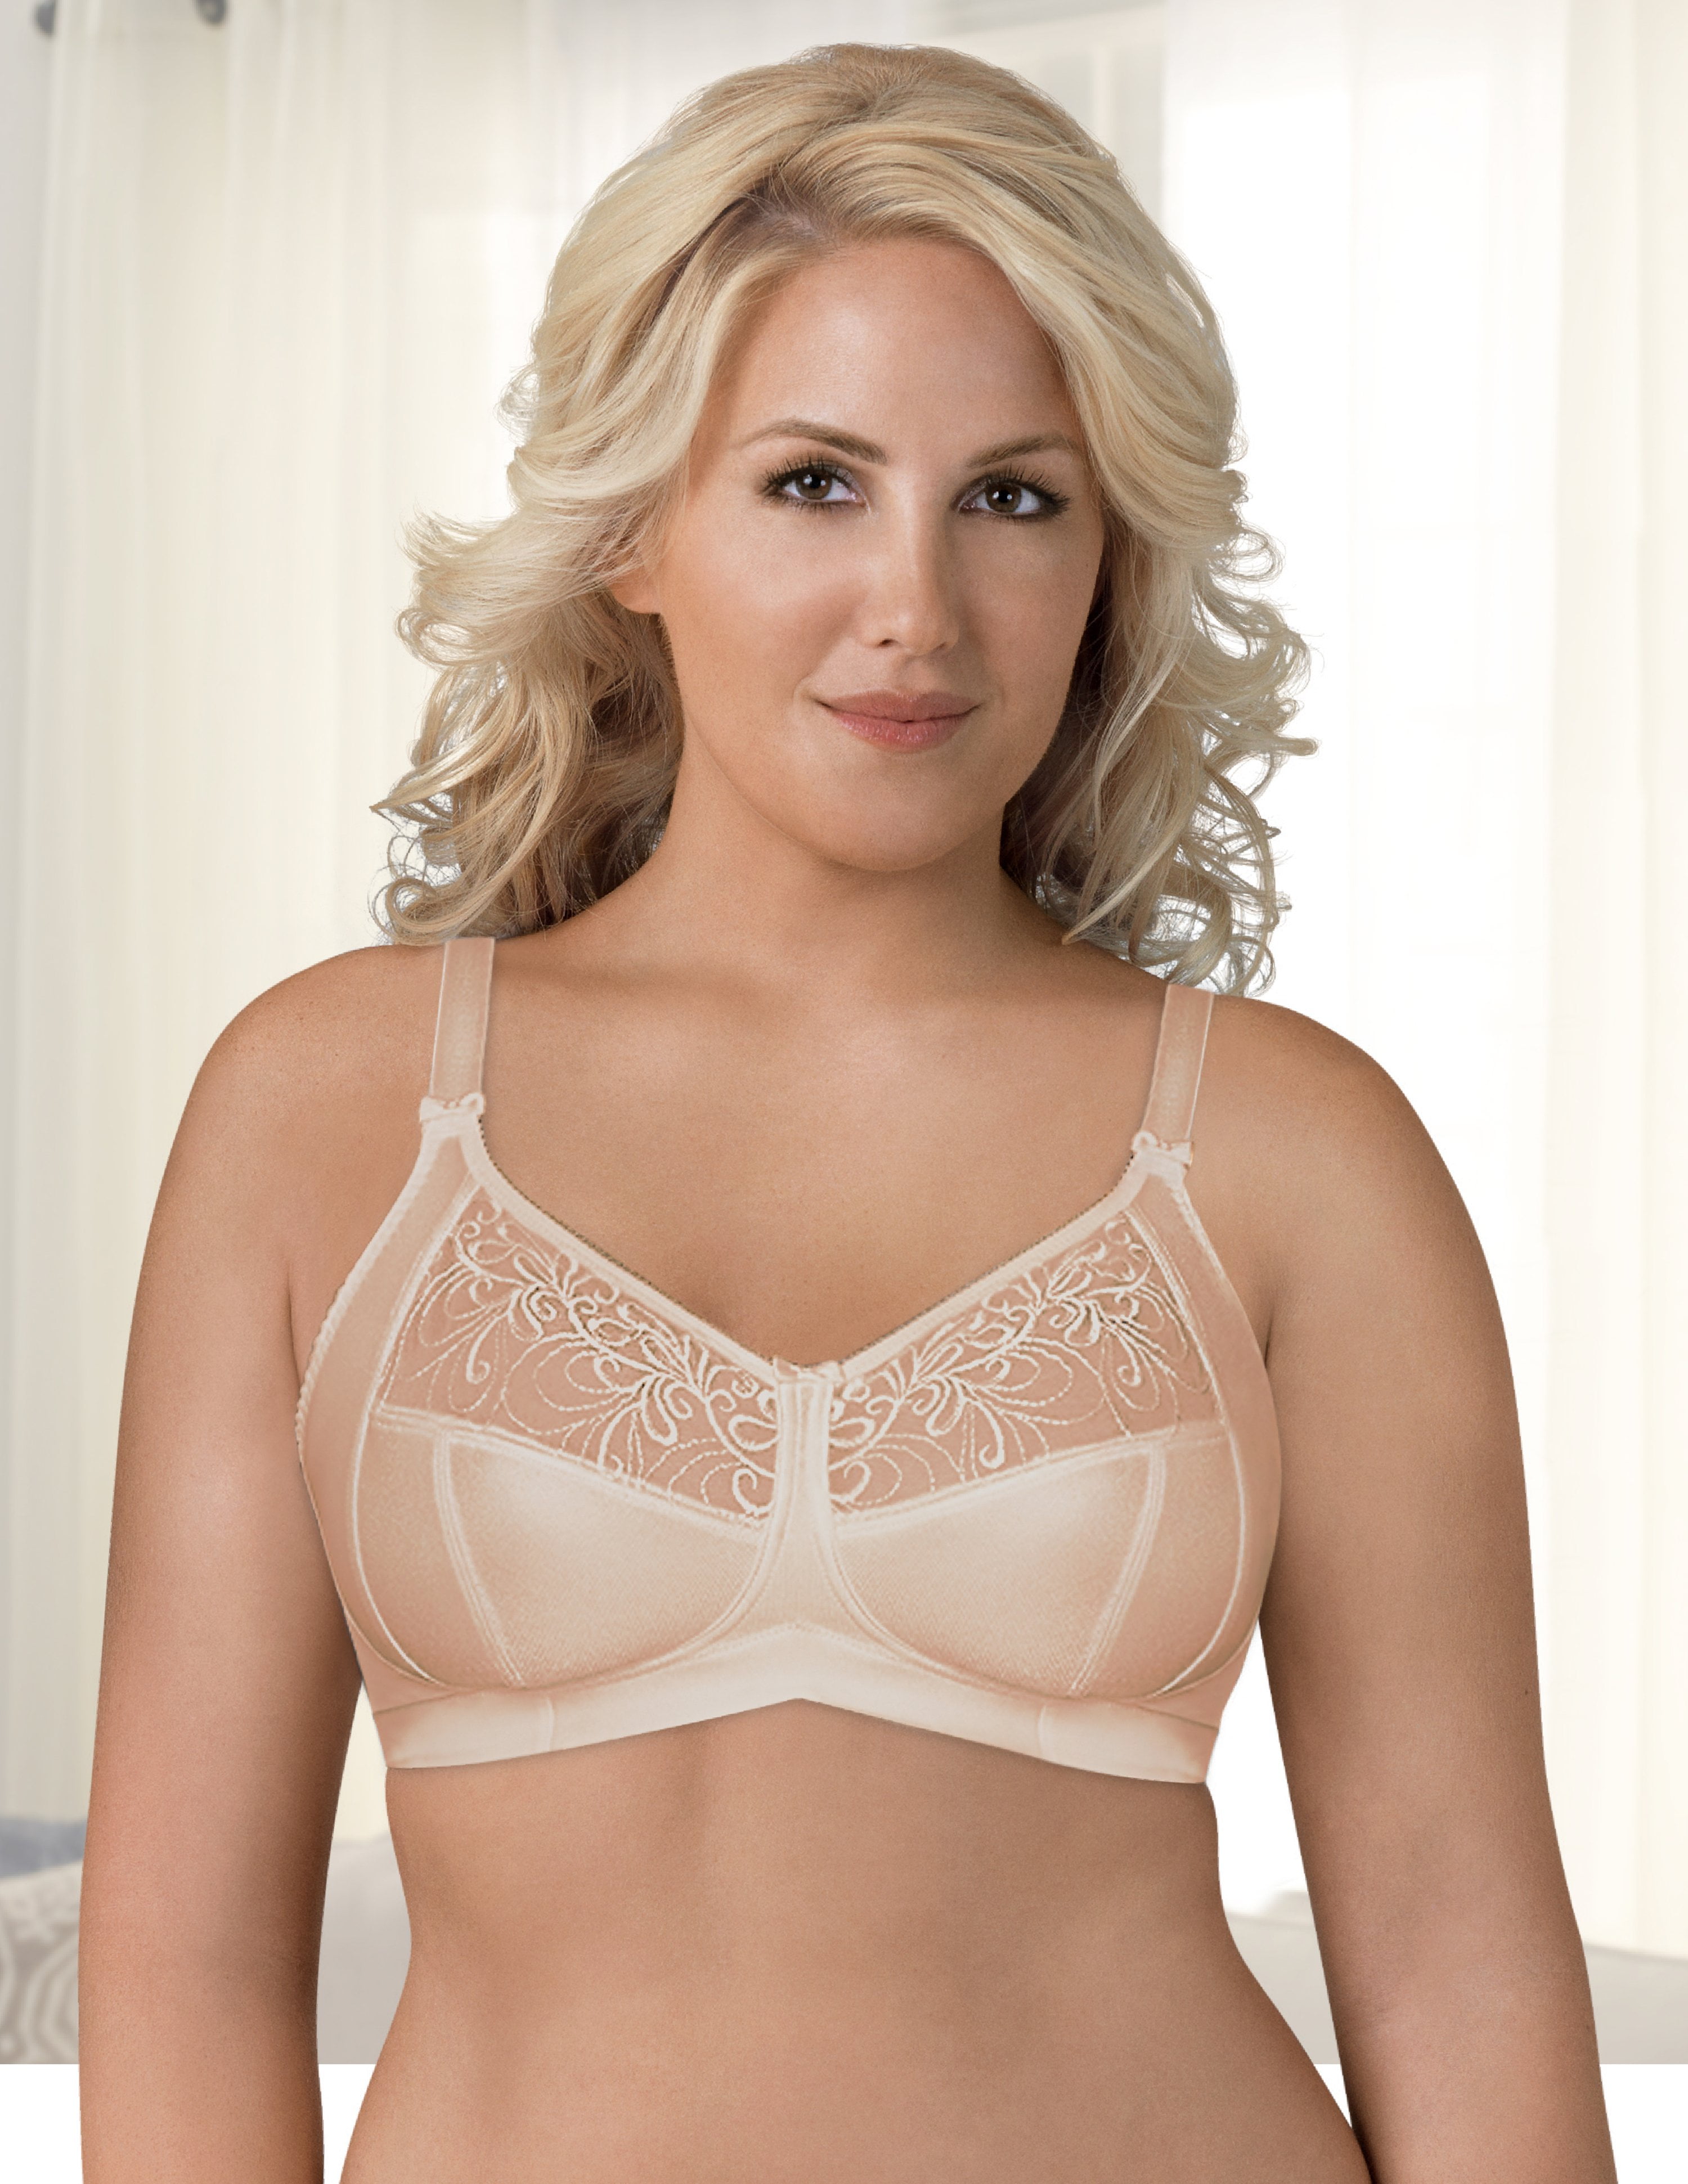 Exquisite Form Fully® Soft Cup Bra with Embroidered Mesh - Style 5100514 